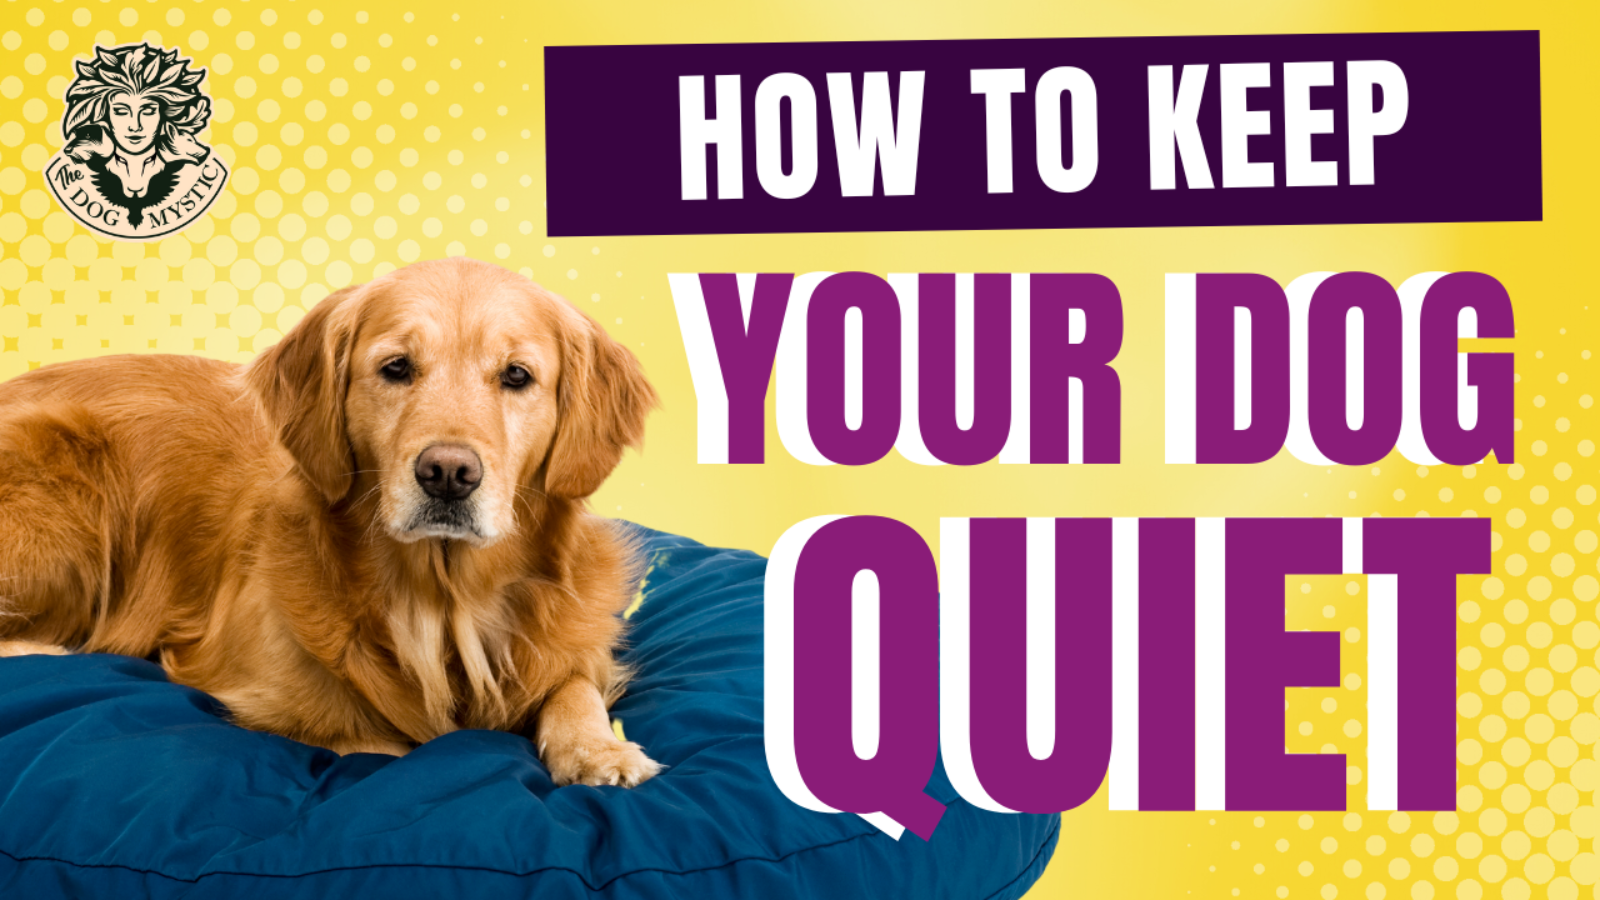 How To Keep Your Dog Quiet